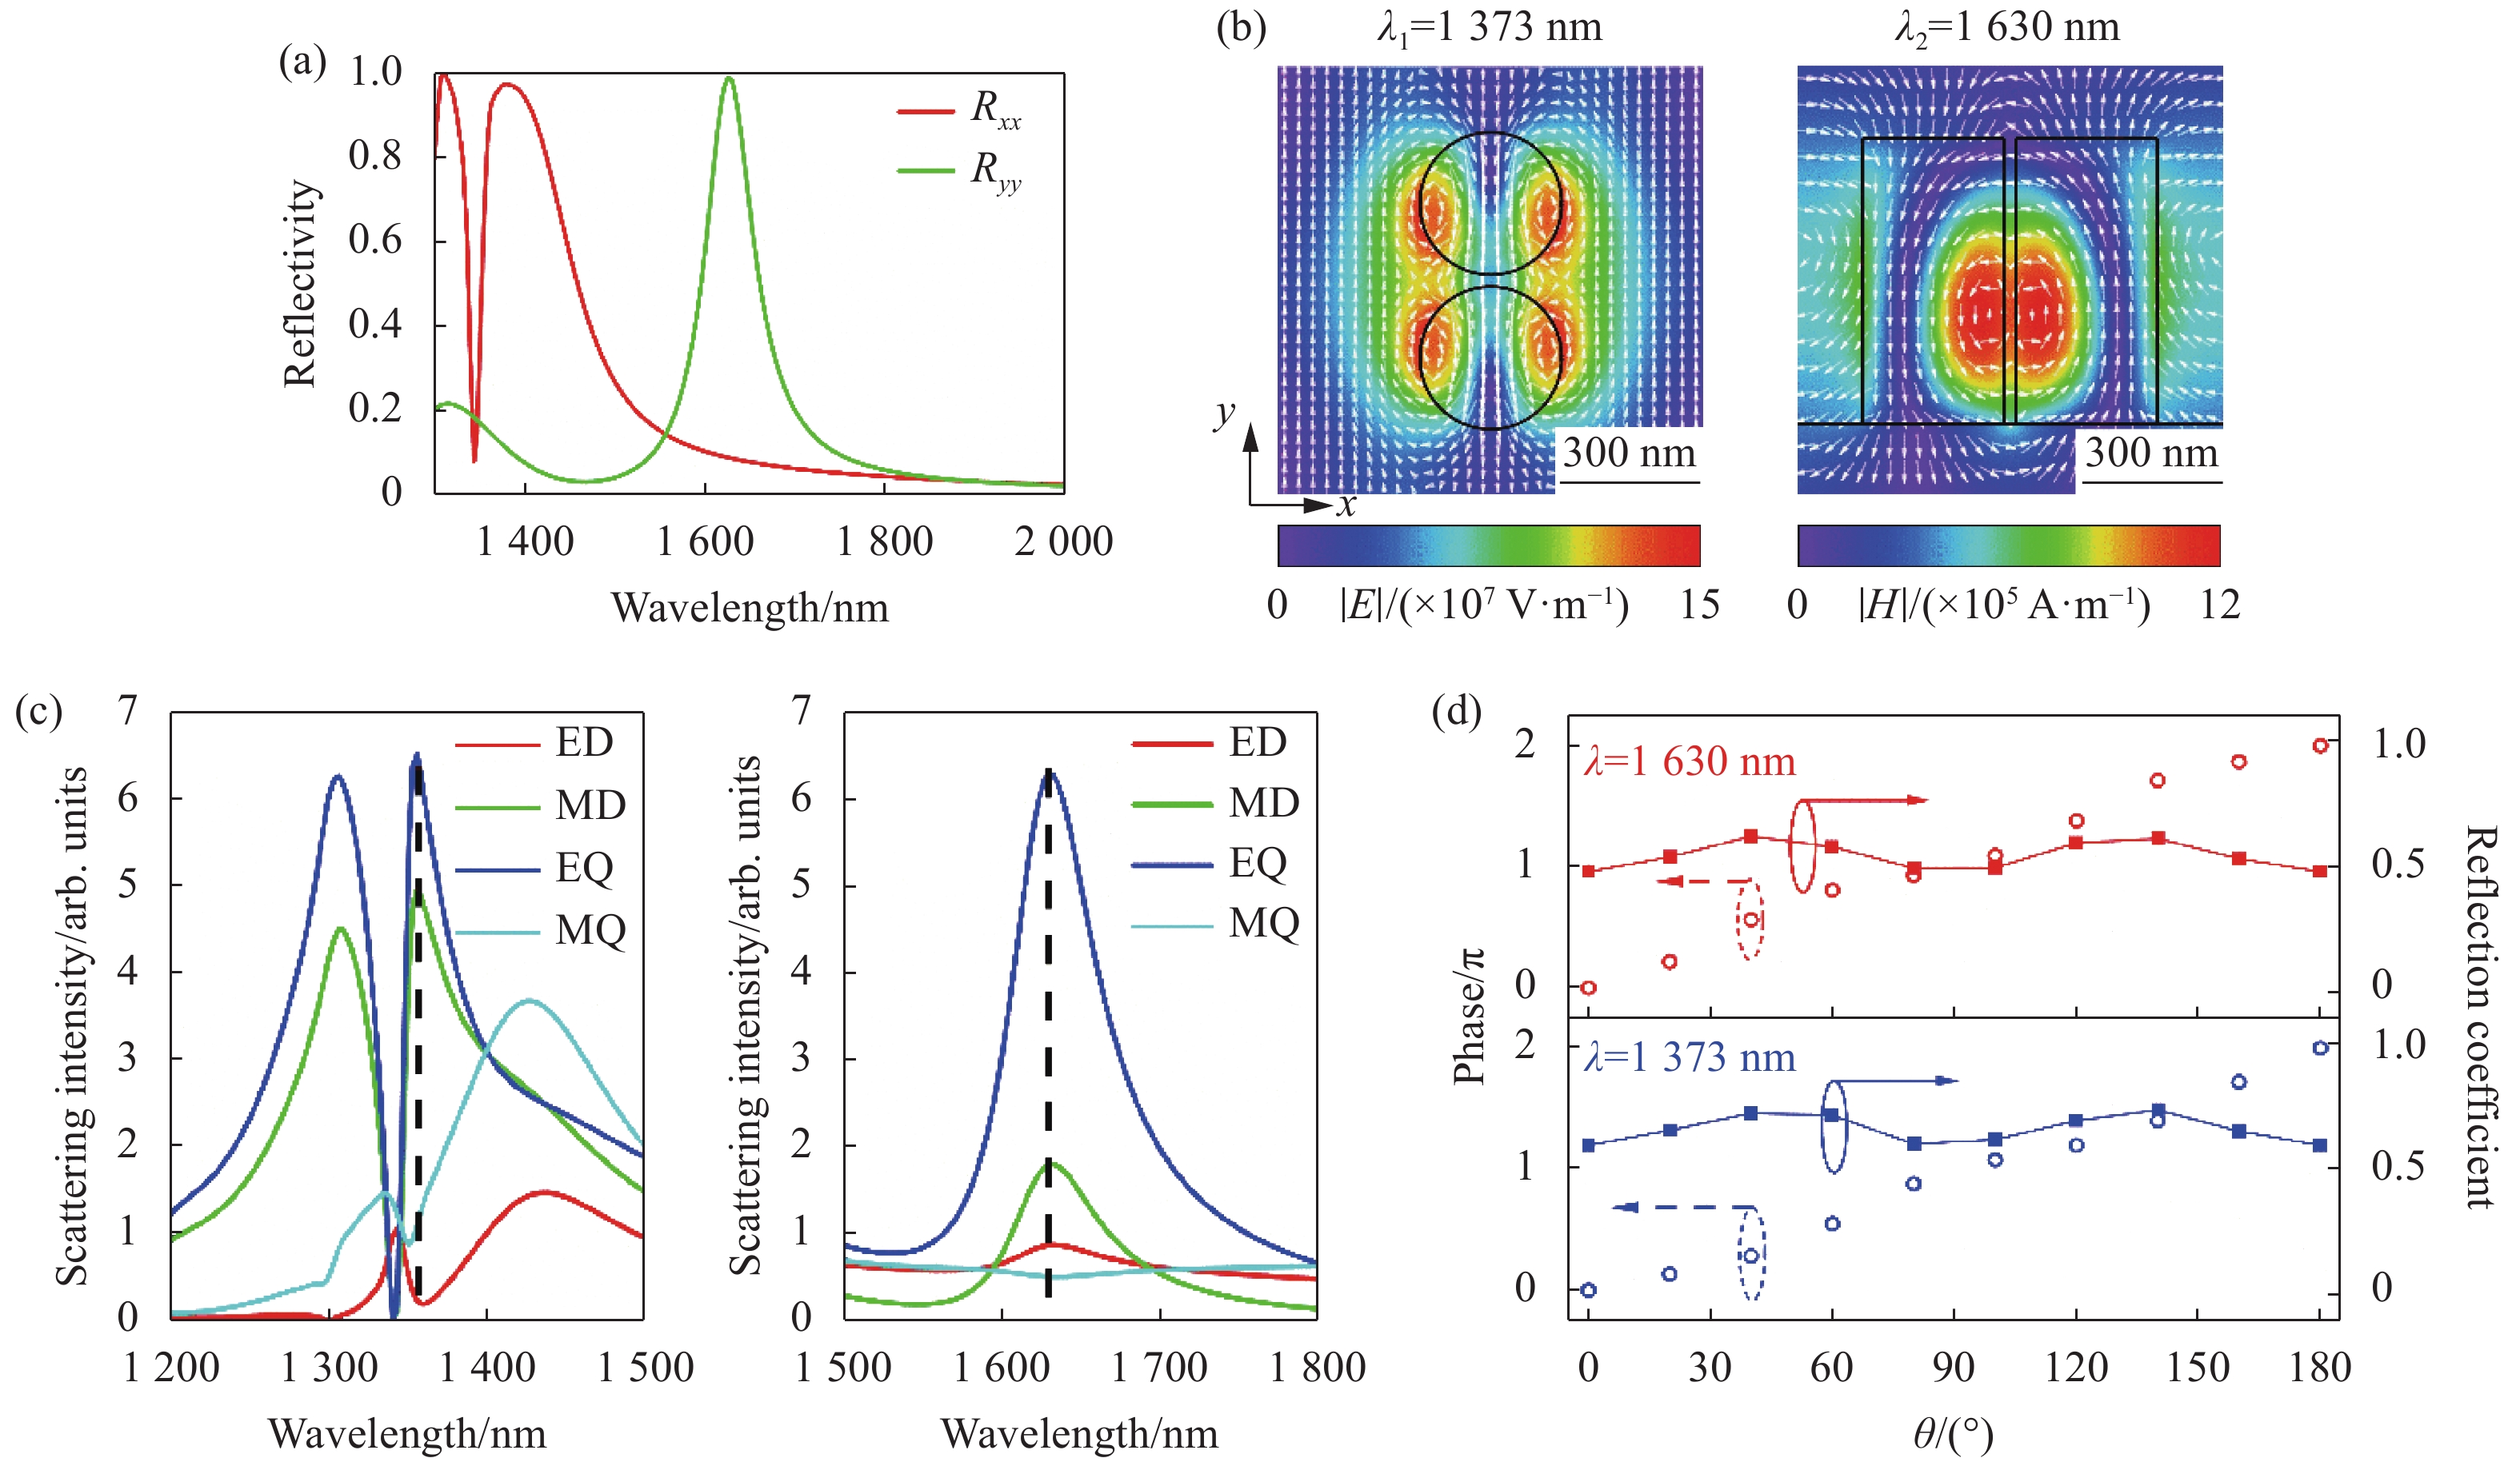 Simulated results of the periodic unit cells. (a) Reflectivity for x- and y-polarized incident unit structure (θ=0); (b) Electric and magnetic distributions at two resonant wavelengths for x- and y-polarized incident light (1373 nm and 1630 nm); (c) Electromagnetic multi-pole decomposition for x- and y- polarized incident light; (d) Reflective anomalous intensity and phase for different orientation angles θ at two resonant wavelengths (with left-handed circularly polarized incidence)